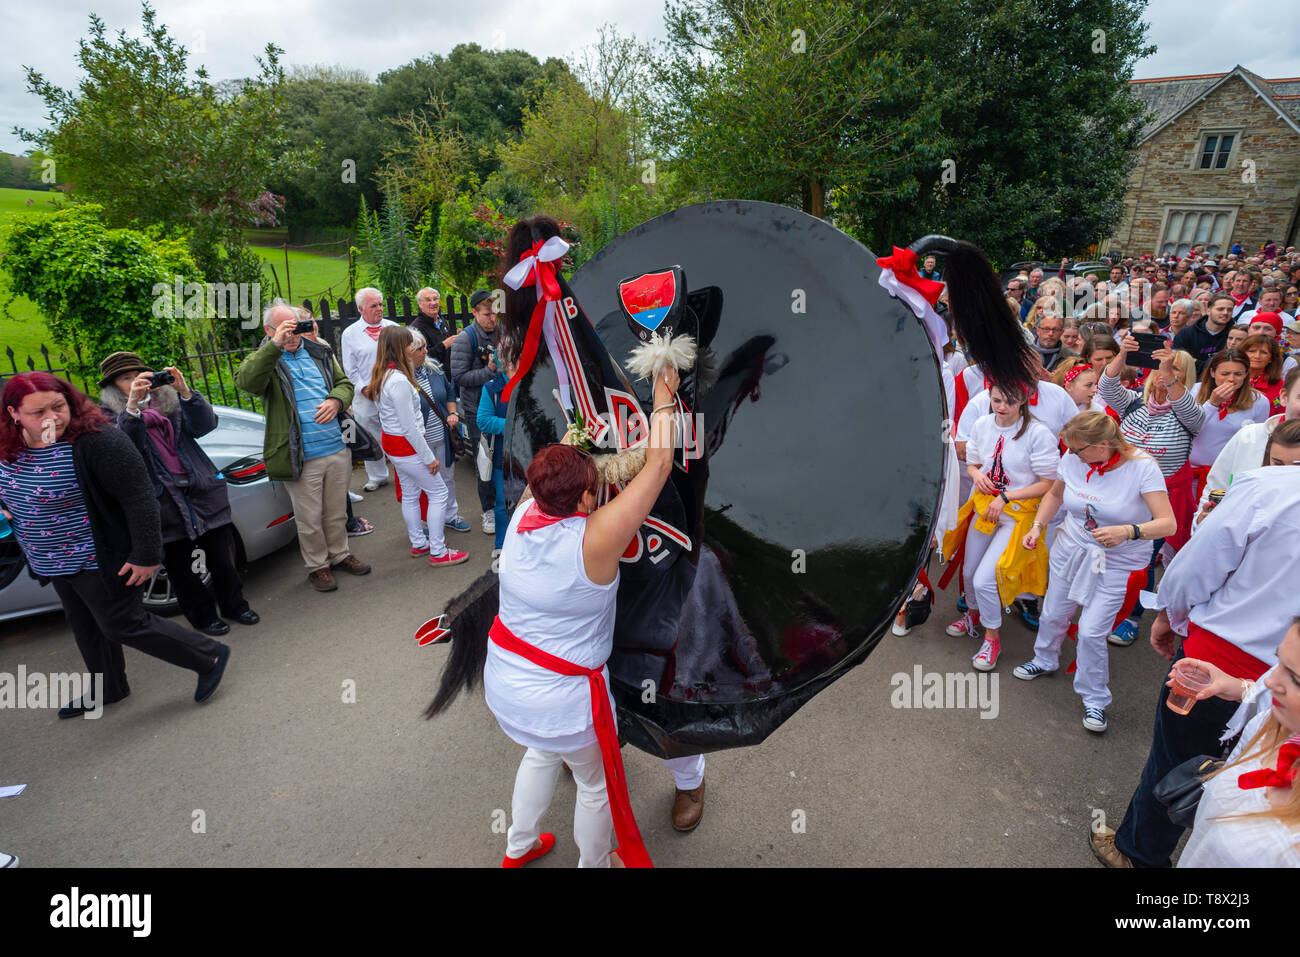 Editorial: Unknow members of the public and potential logos and signage. Padstow, Cornwall. 01/05/2019, The Obby Oss parade is a centuries old tradtio Stock Photo